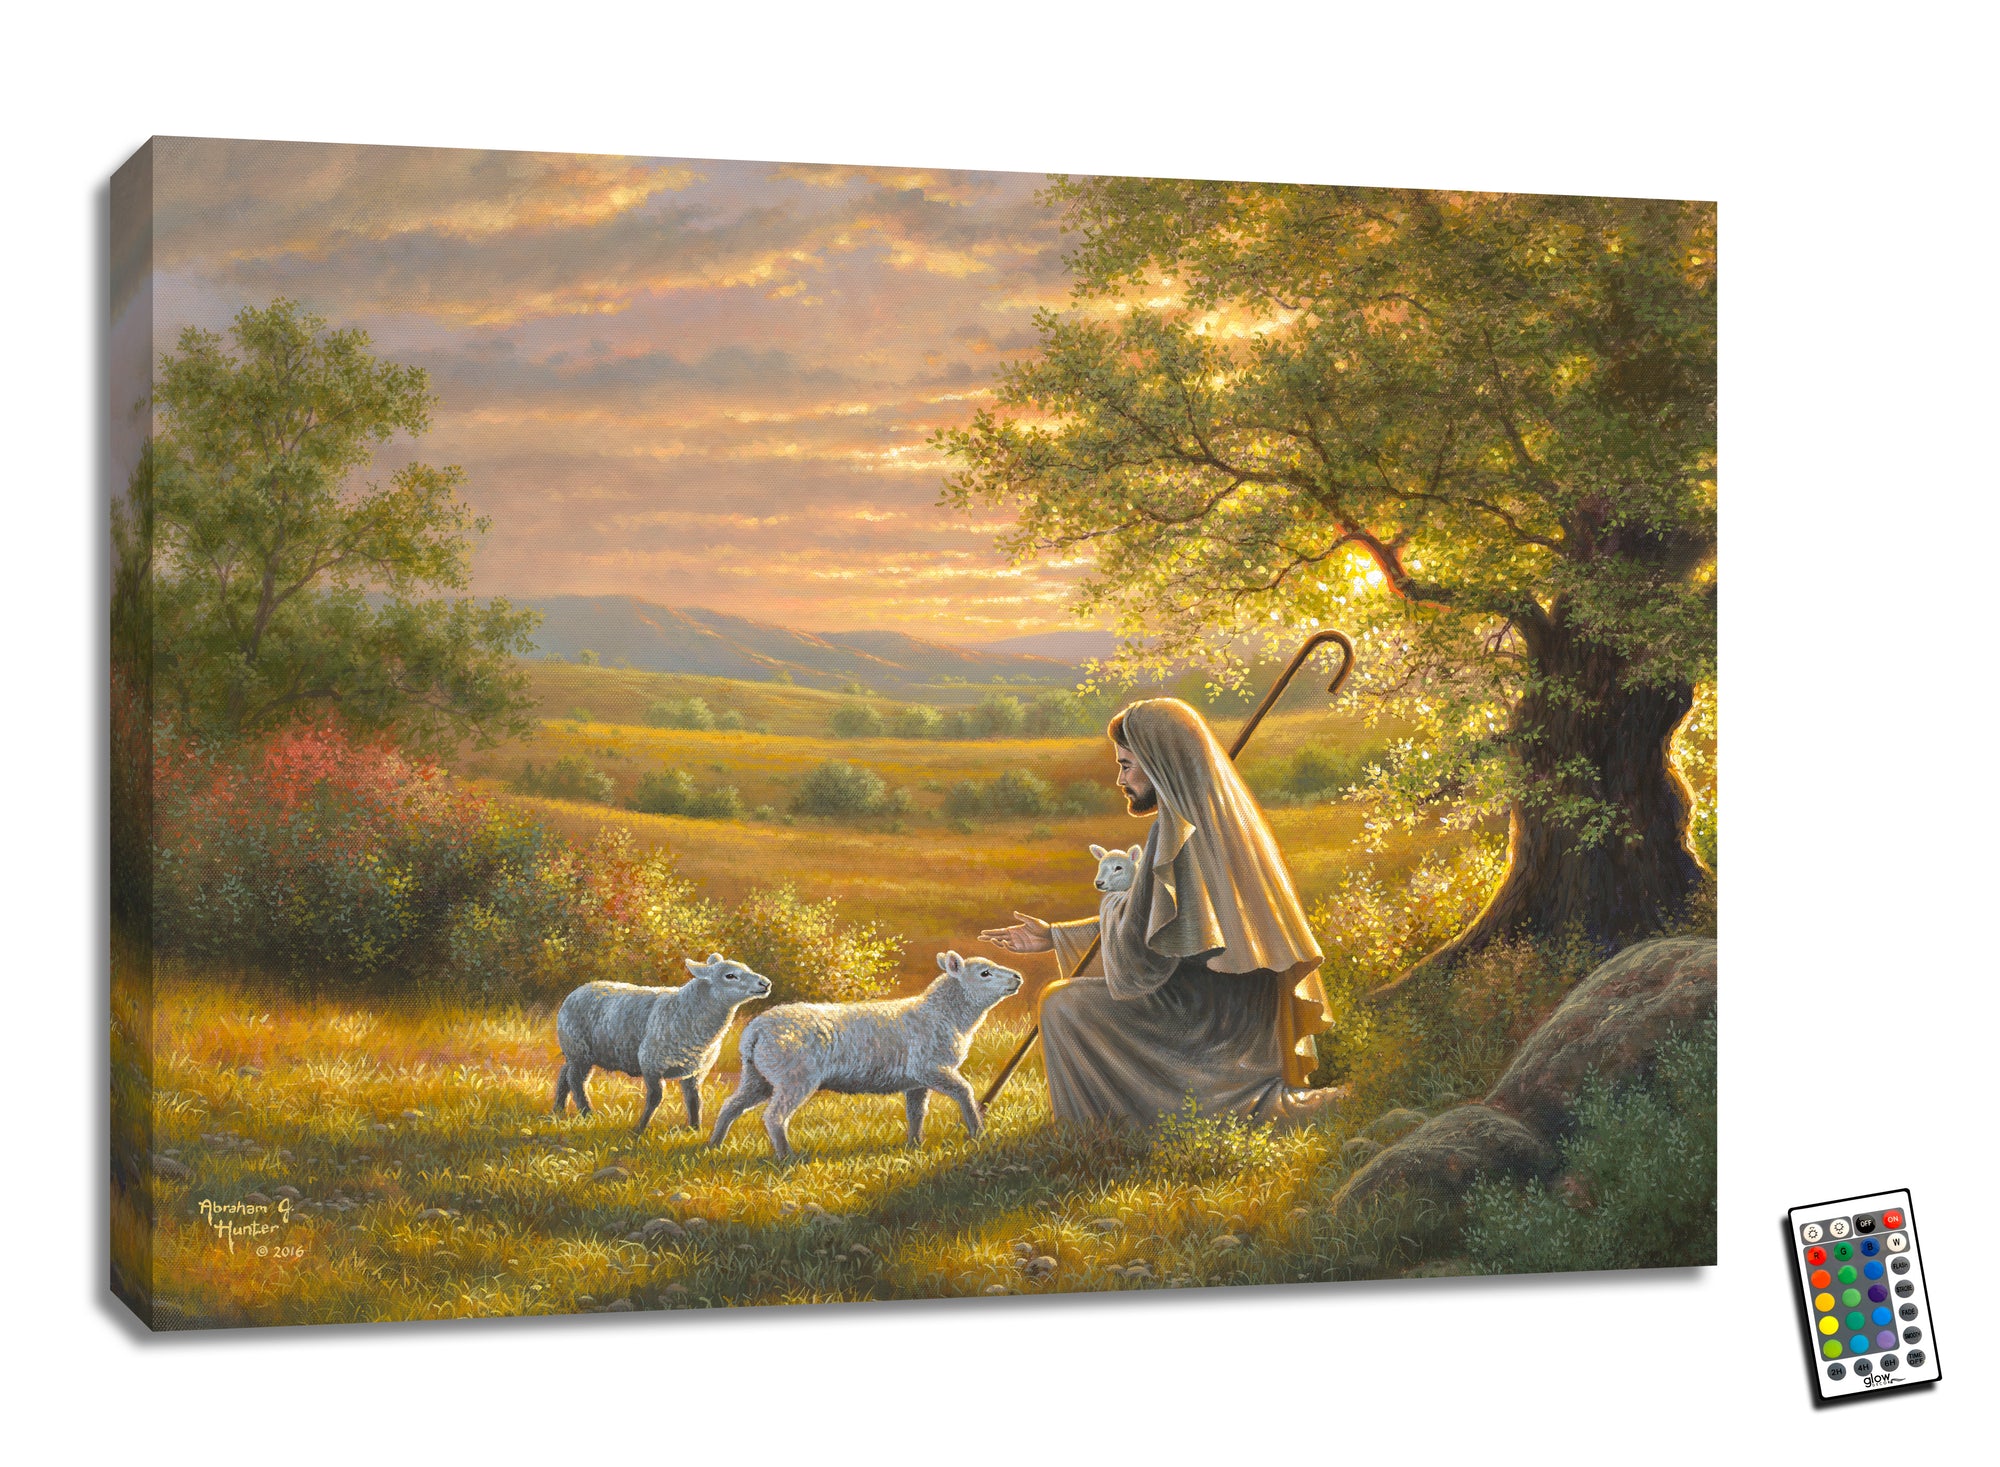 Introducing the stunning "Come Unto Me" fully illuminated LED art, a breathtaking depiction of a shepherd welcoming in his precious lambs as the warm, gentle light of the sun embraces them. This gorgeous piece is not only a stunning work of art but also a powerful metaphor for the love and acceptance of God.